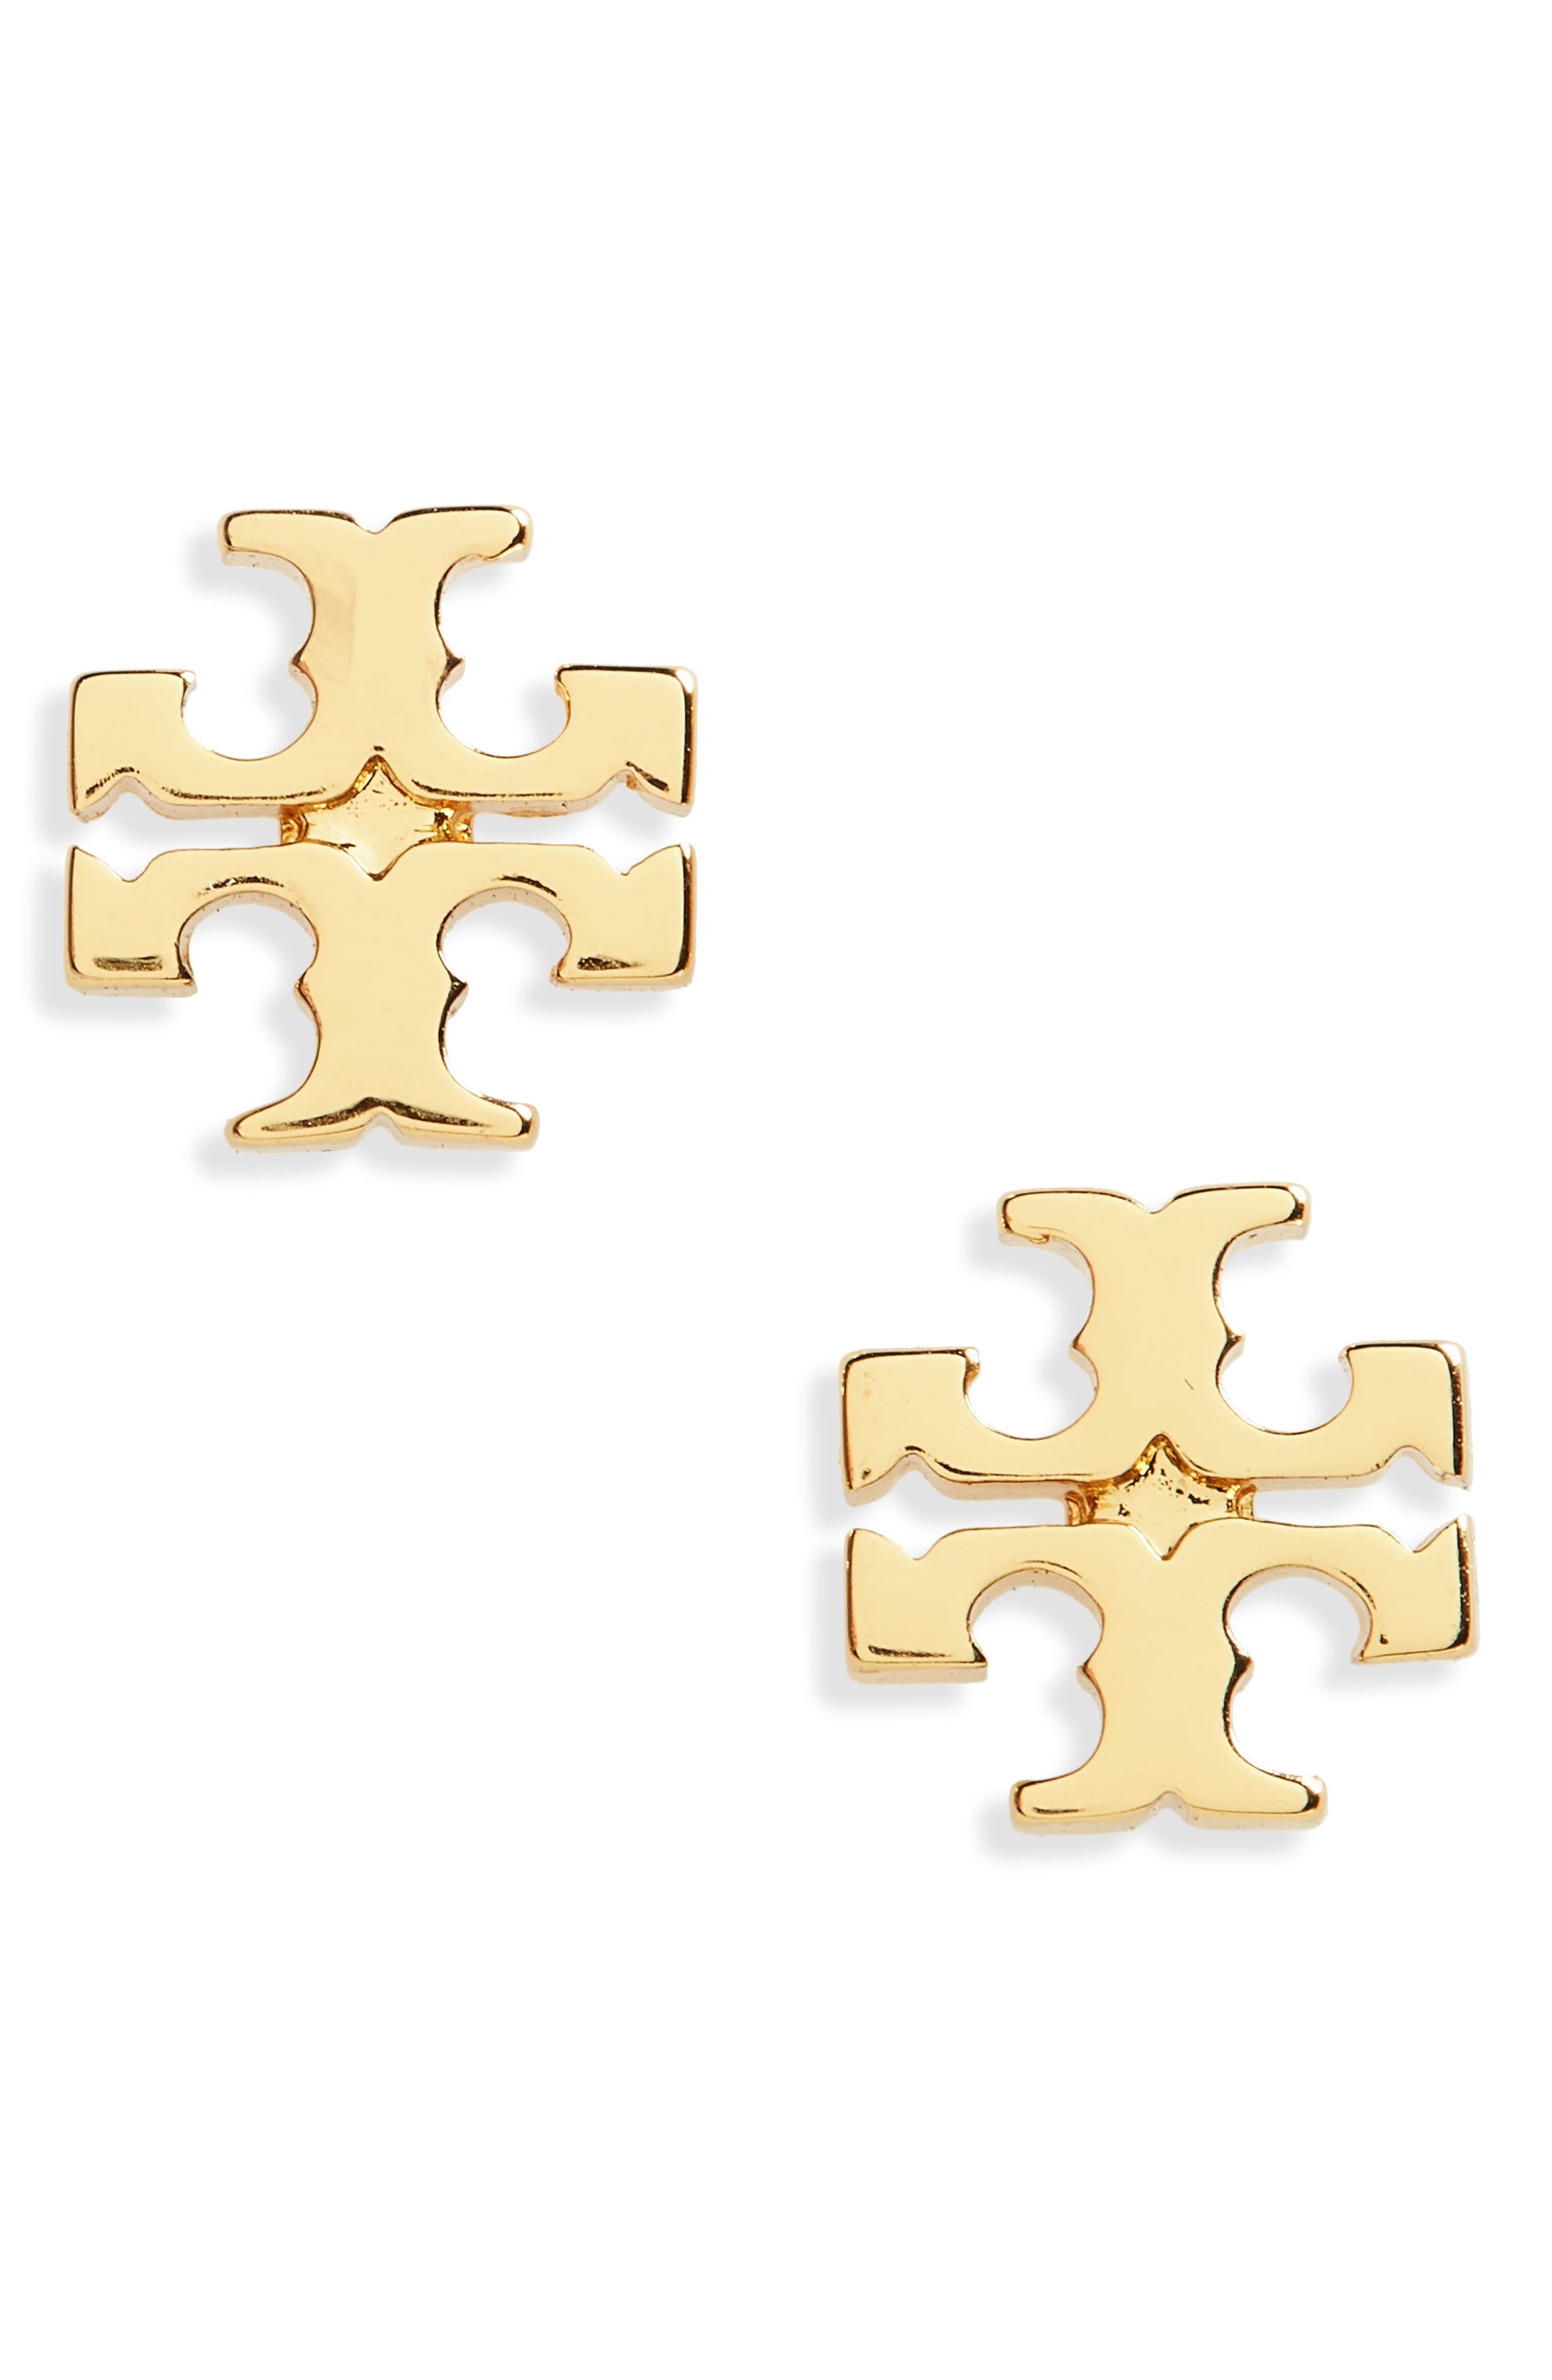 Tory Burch Logo Stud Earrings in Tory Gold at Nordstrom